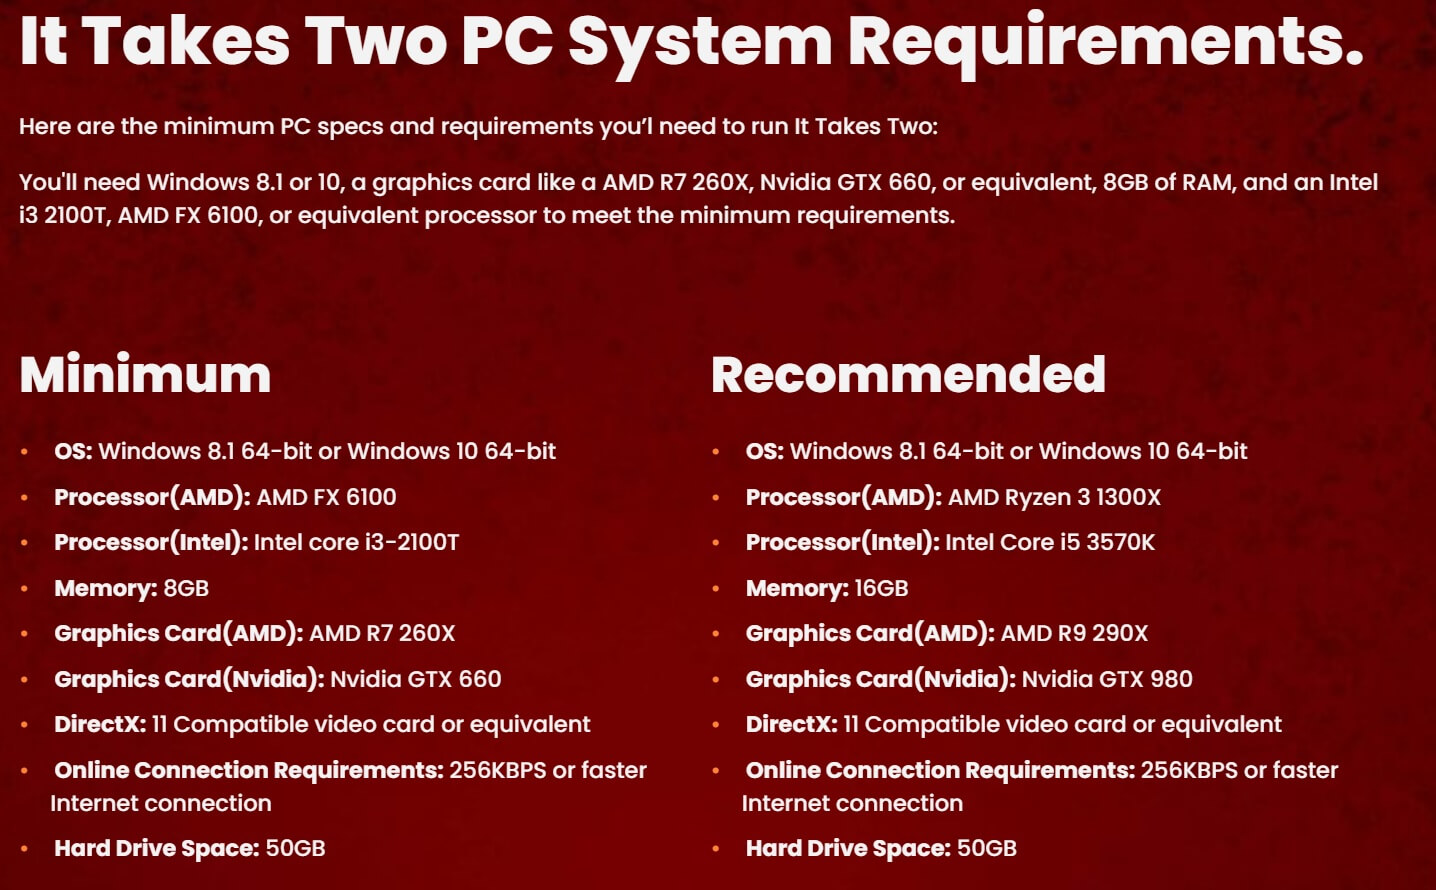 It Takes Two system requirements